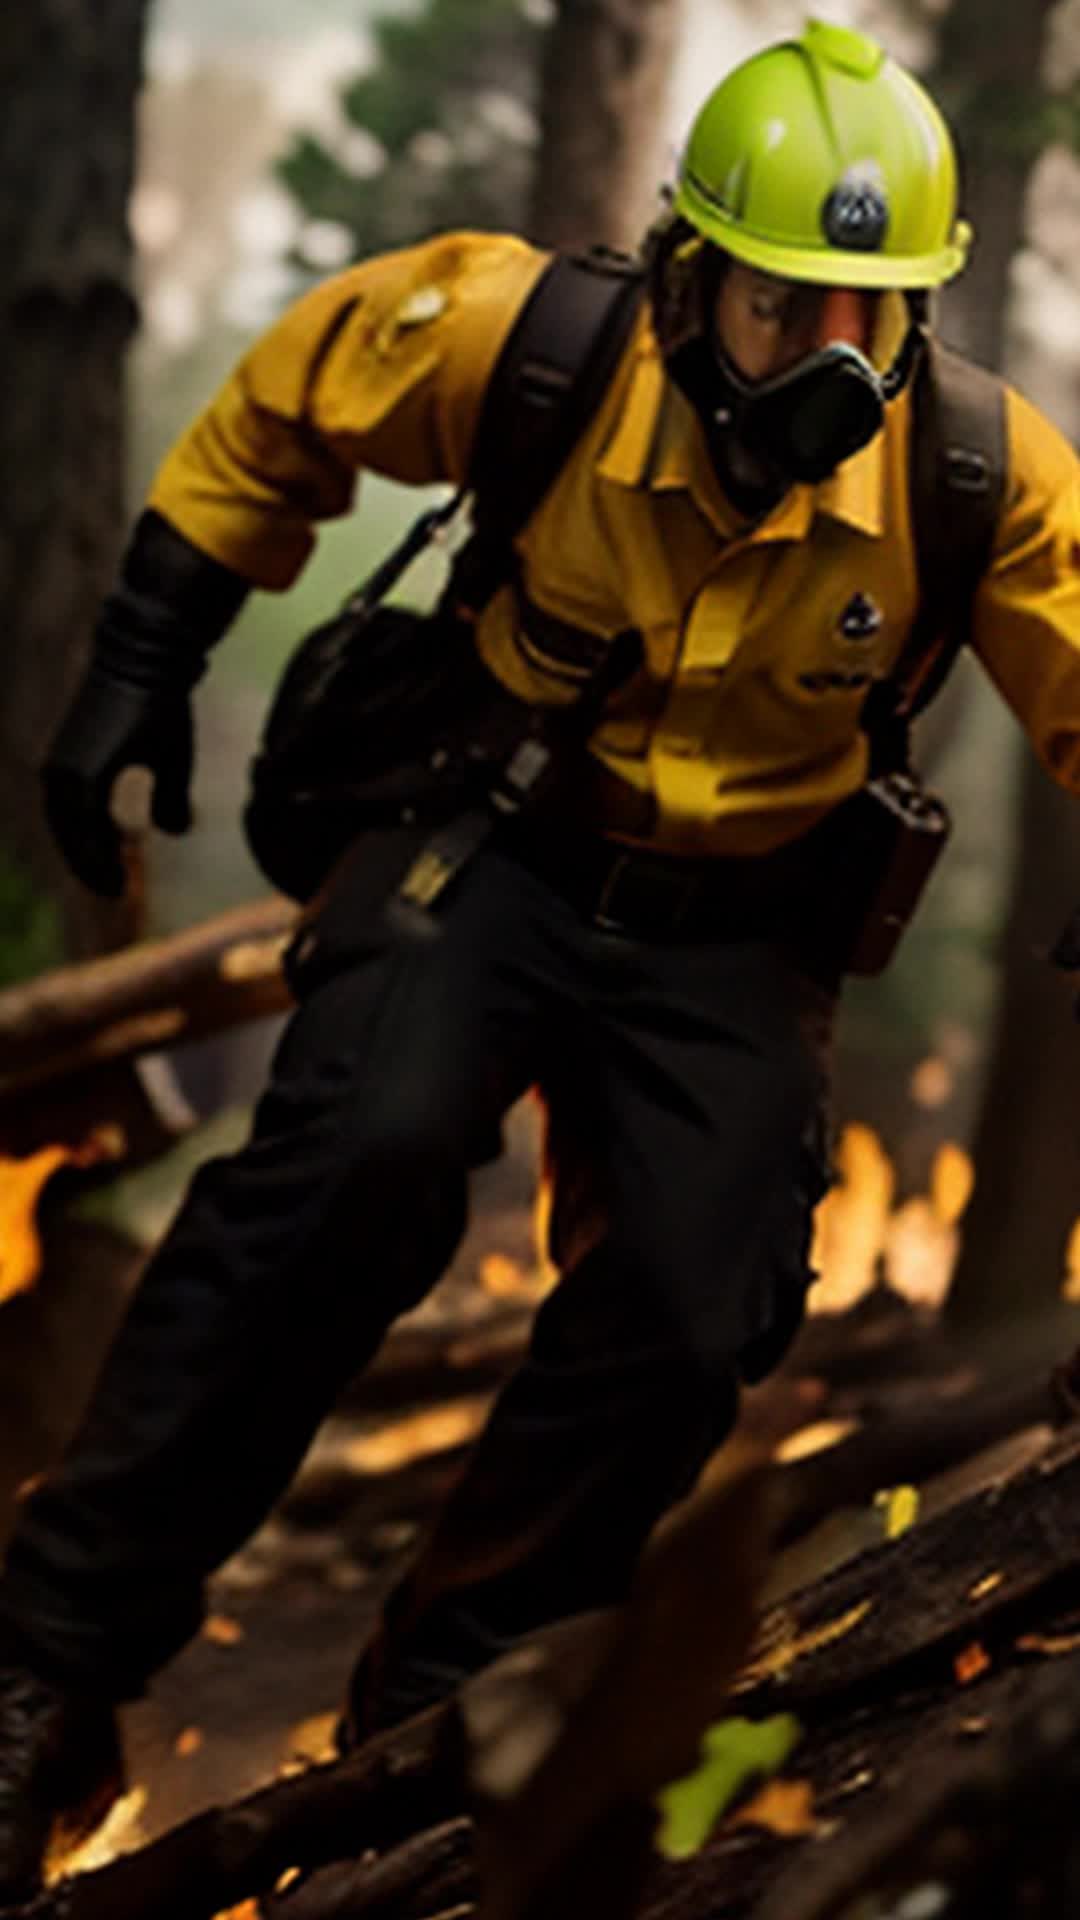 Leaping over fallen, smoldering logs, teenage volunteer firefighter, protective gear shielding rare plant, dynamic action, fiery surroundings, intense heat effects, close-up on determined expression